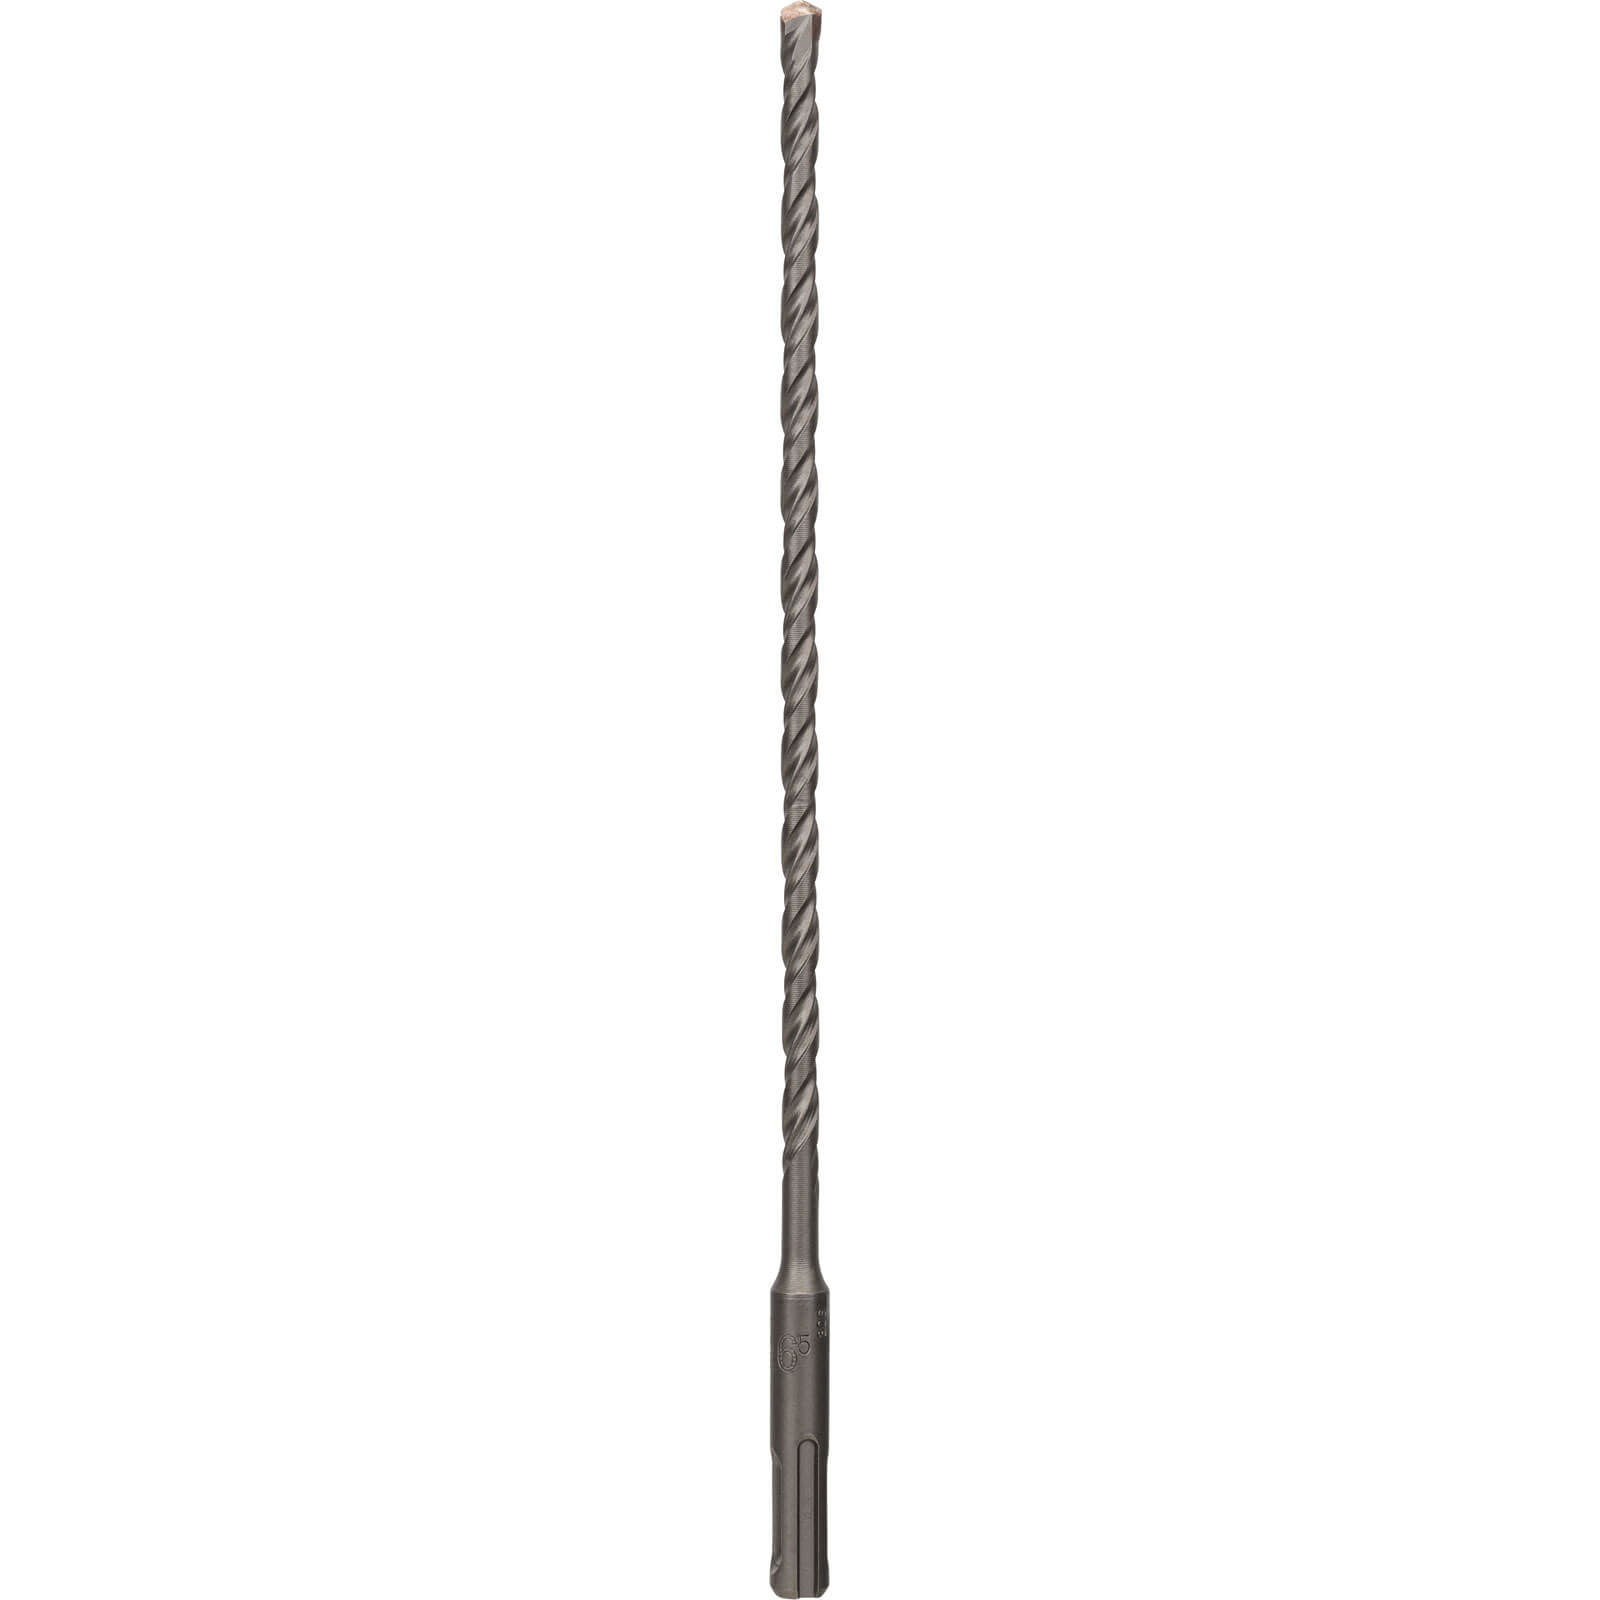 Image of Bosch Series 3 SDS Plus Masonry Drill Bit 6.5mm 260mm Pack of 10